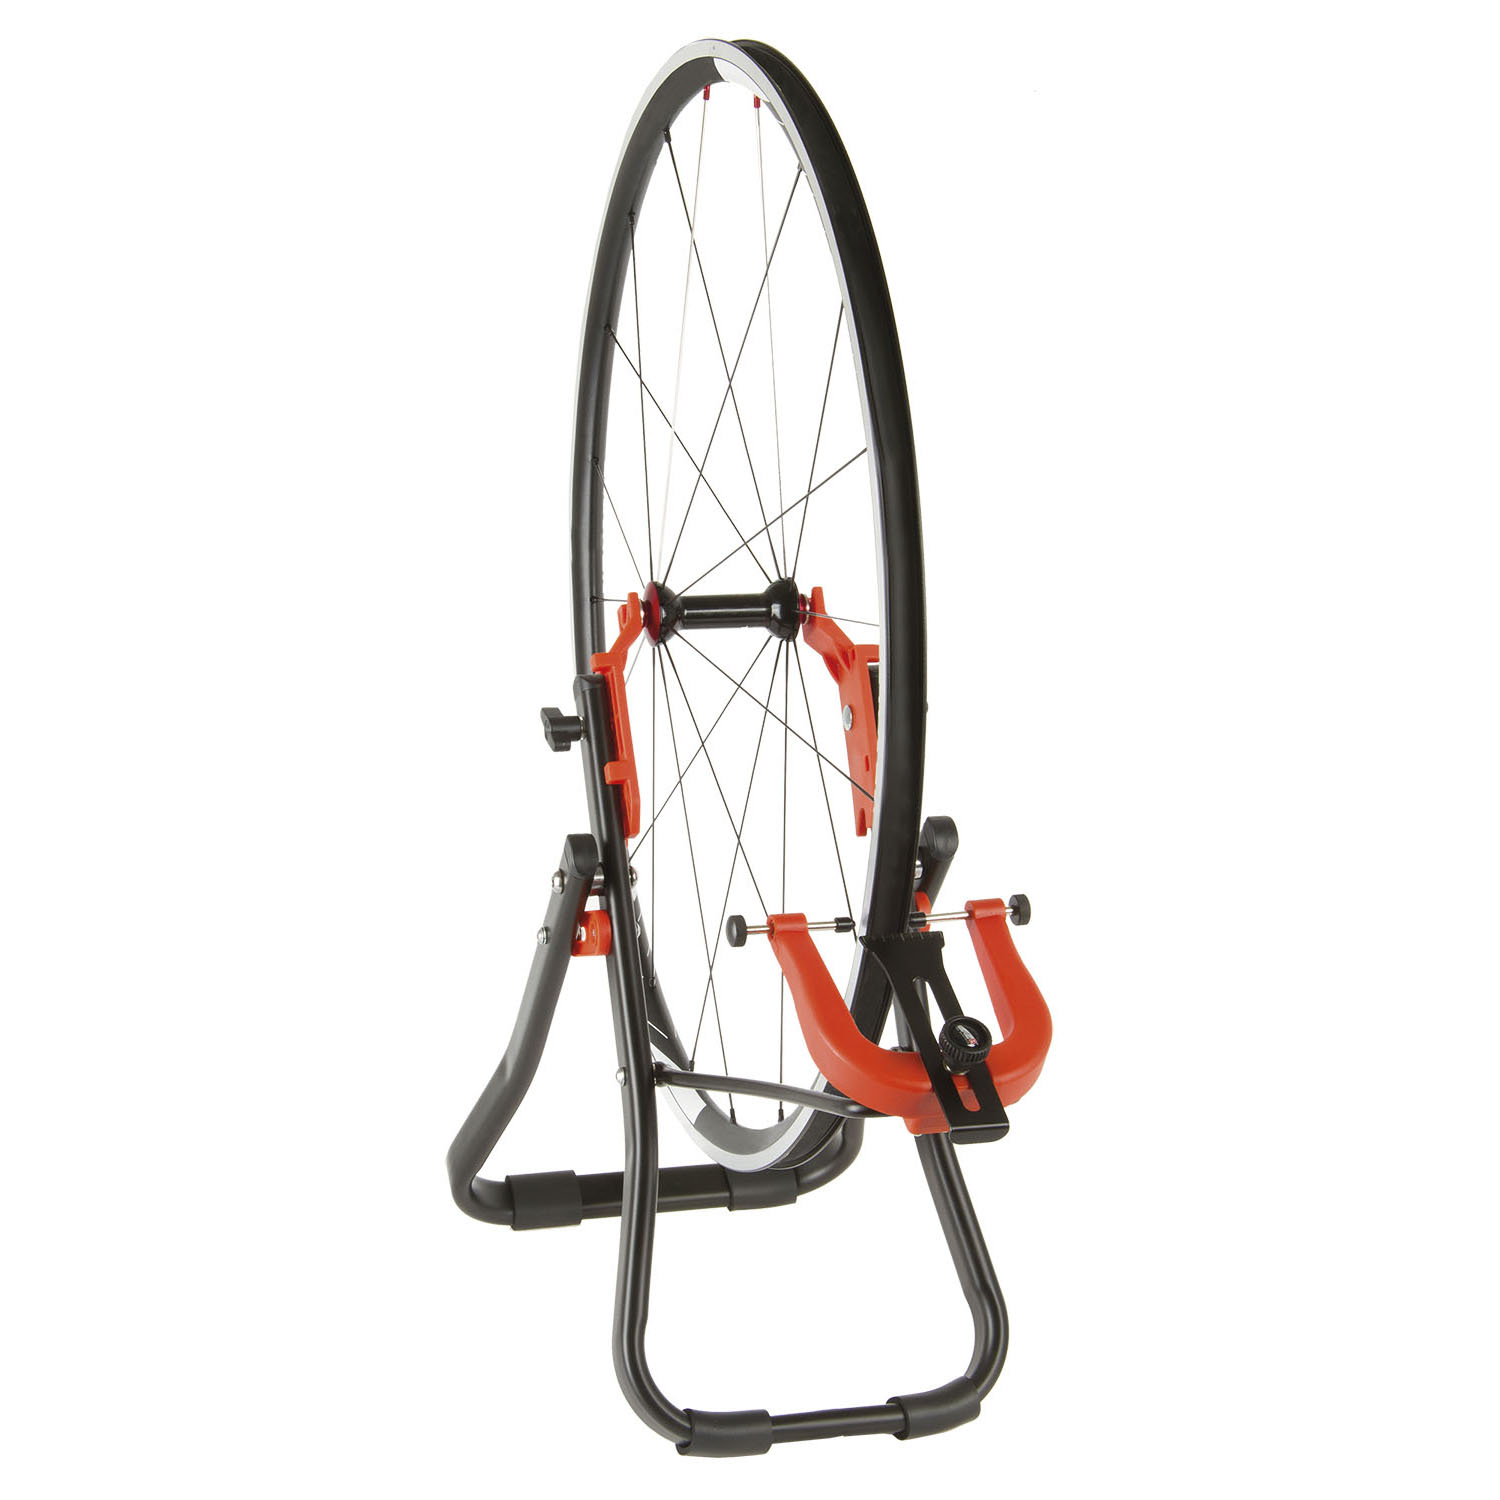 SUPER B TB-PF25 wheel truing stand – AVAILABLE IN SELECTED BIKE SHOPS